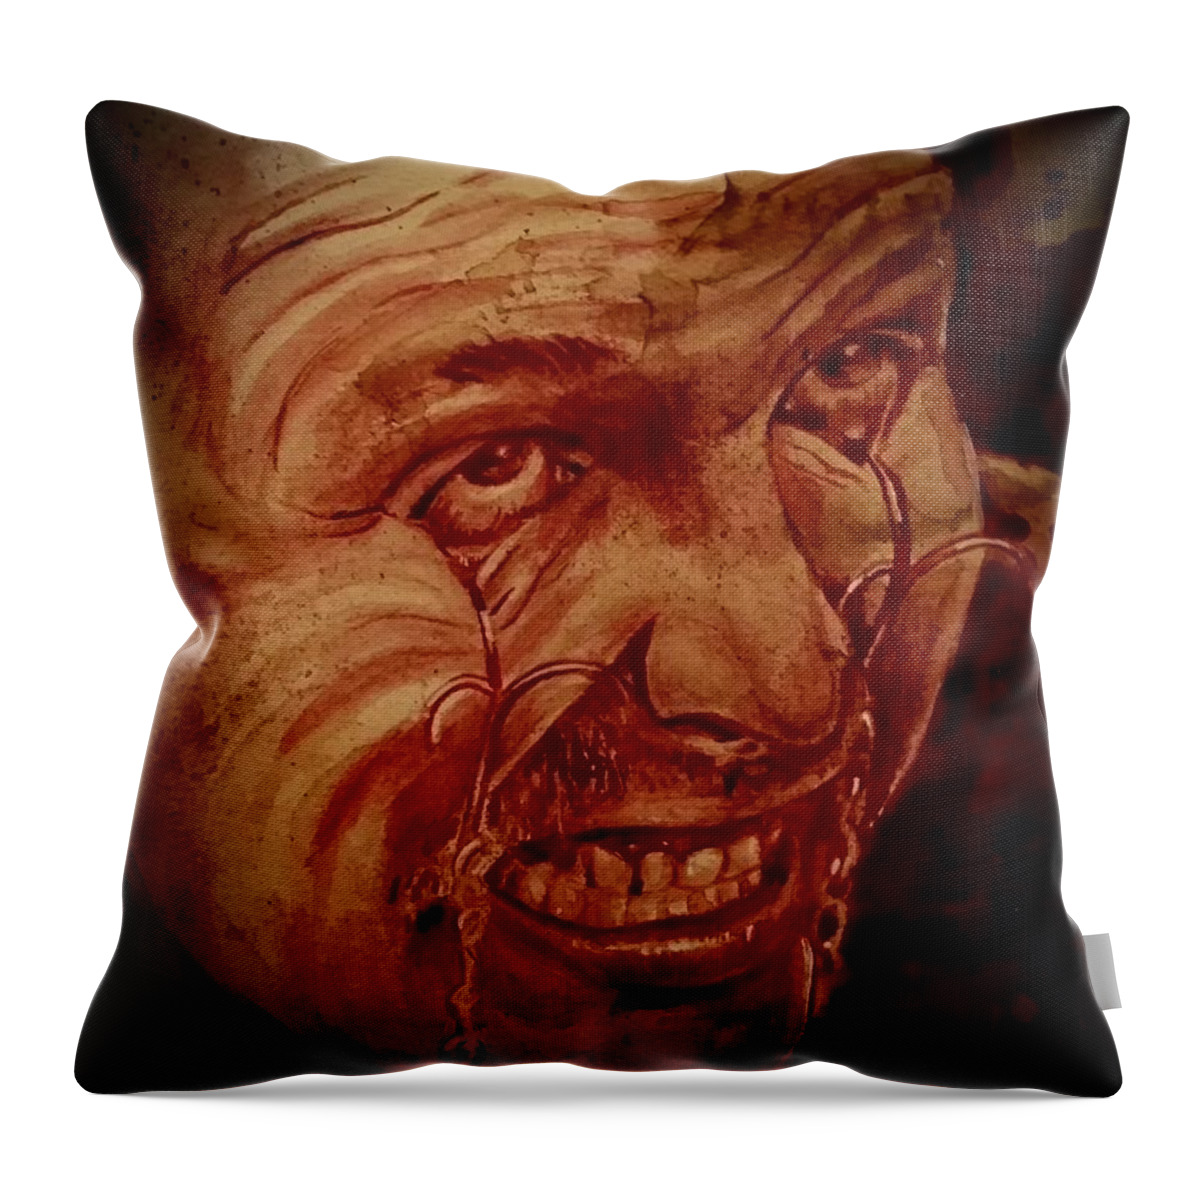 George The Giant Throw Pillow featuring the painting George The Giant by Ryan Almighty